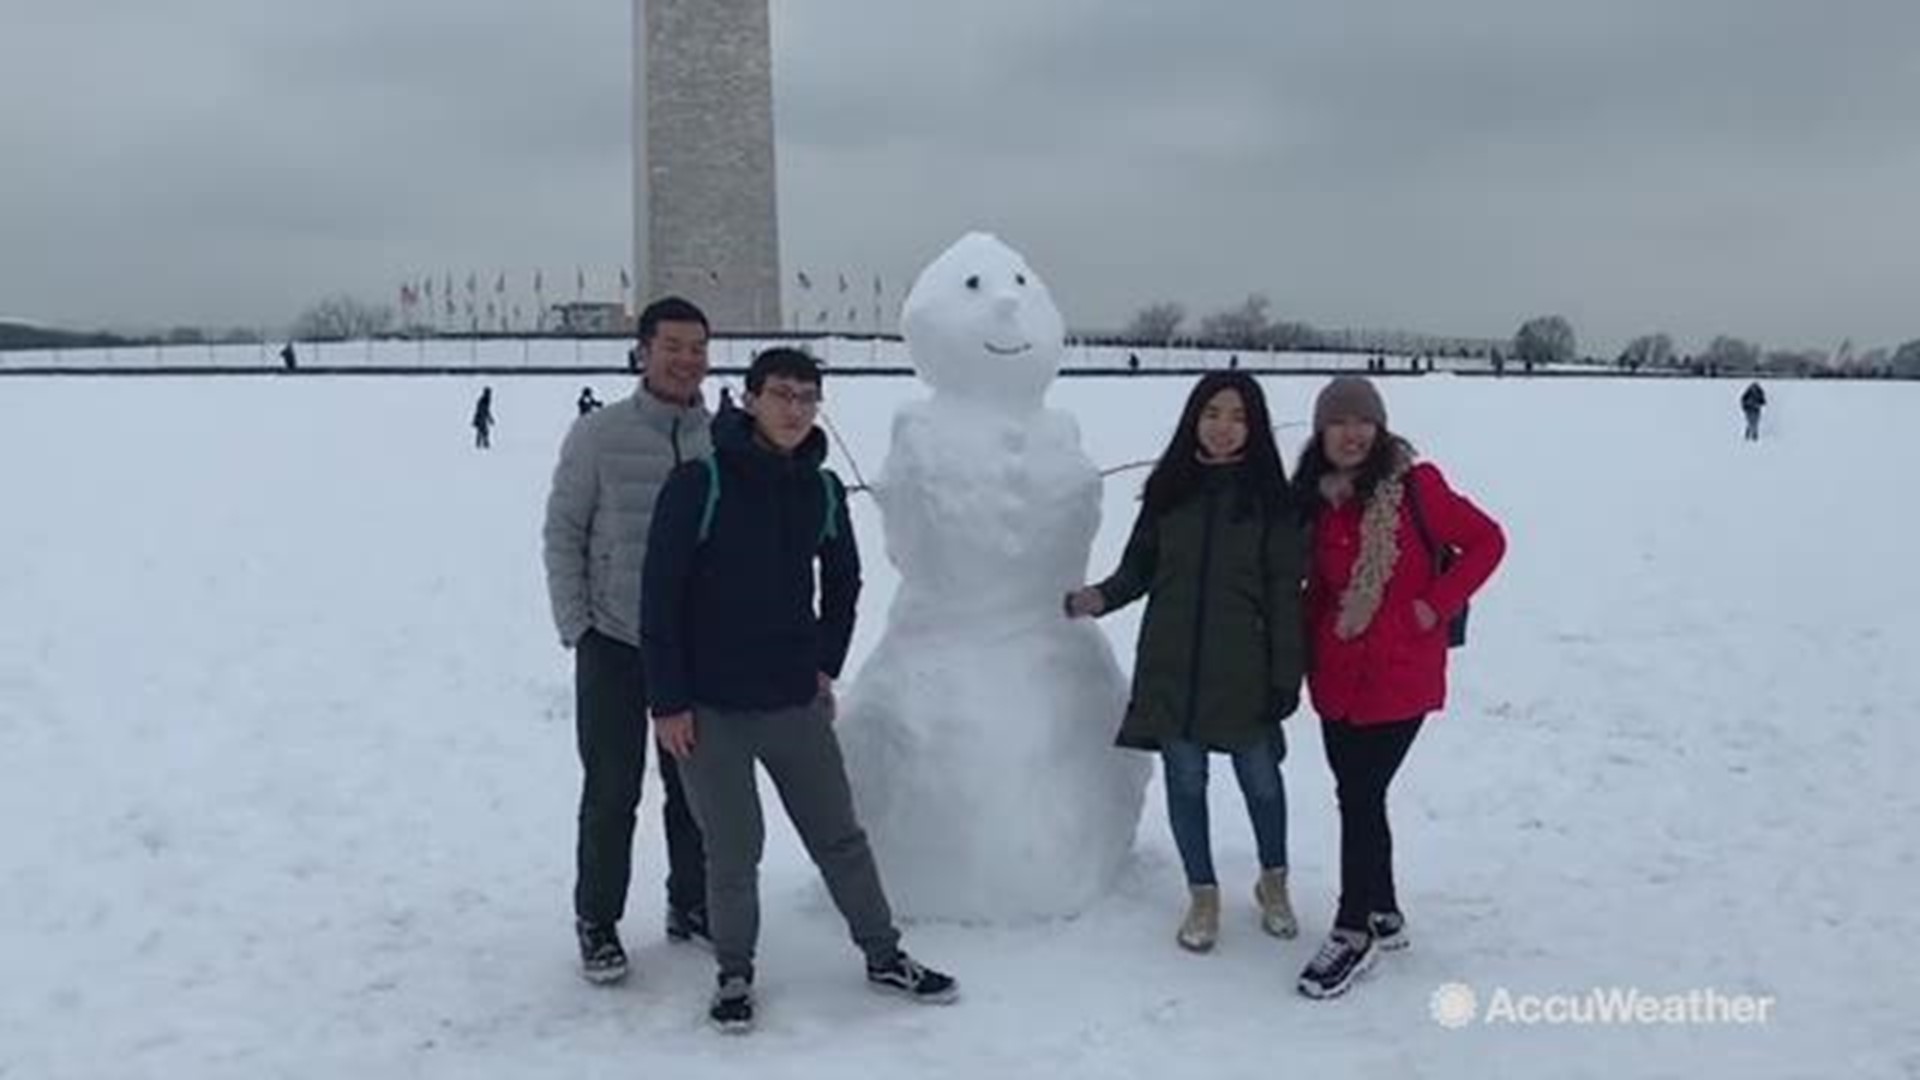 A group of people having a blast during the winter storm decides to pose for a picture with this snowman in Washington, DC on Jan. 13.